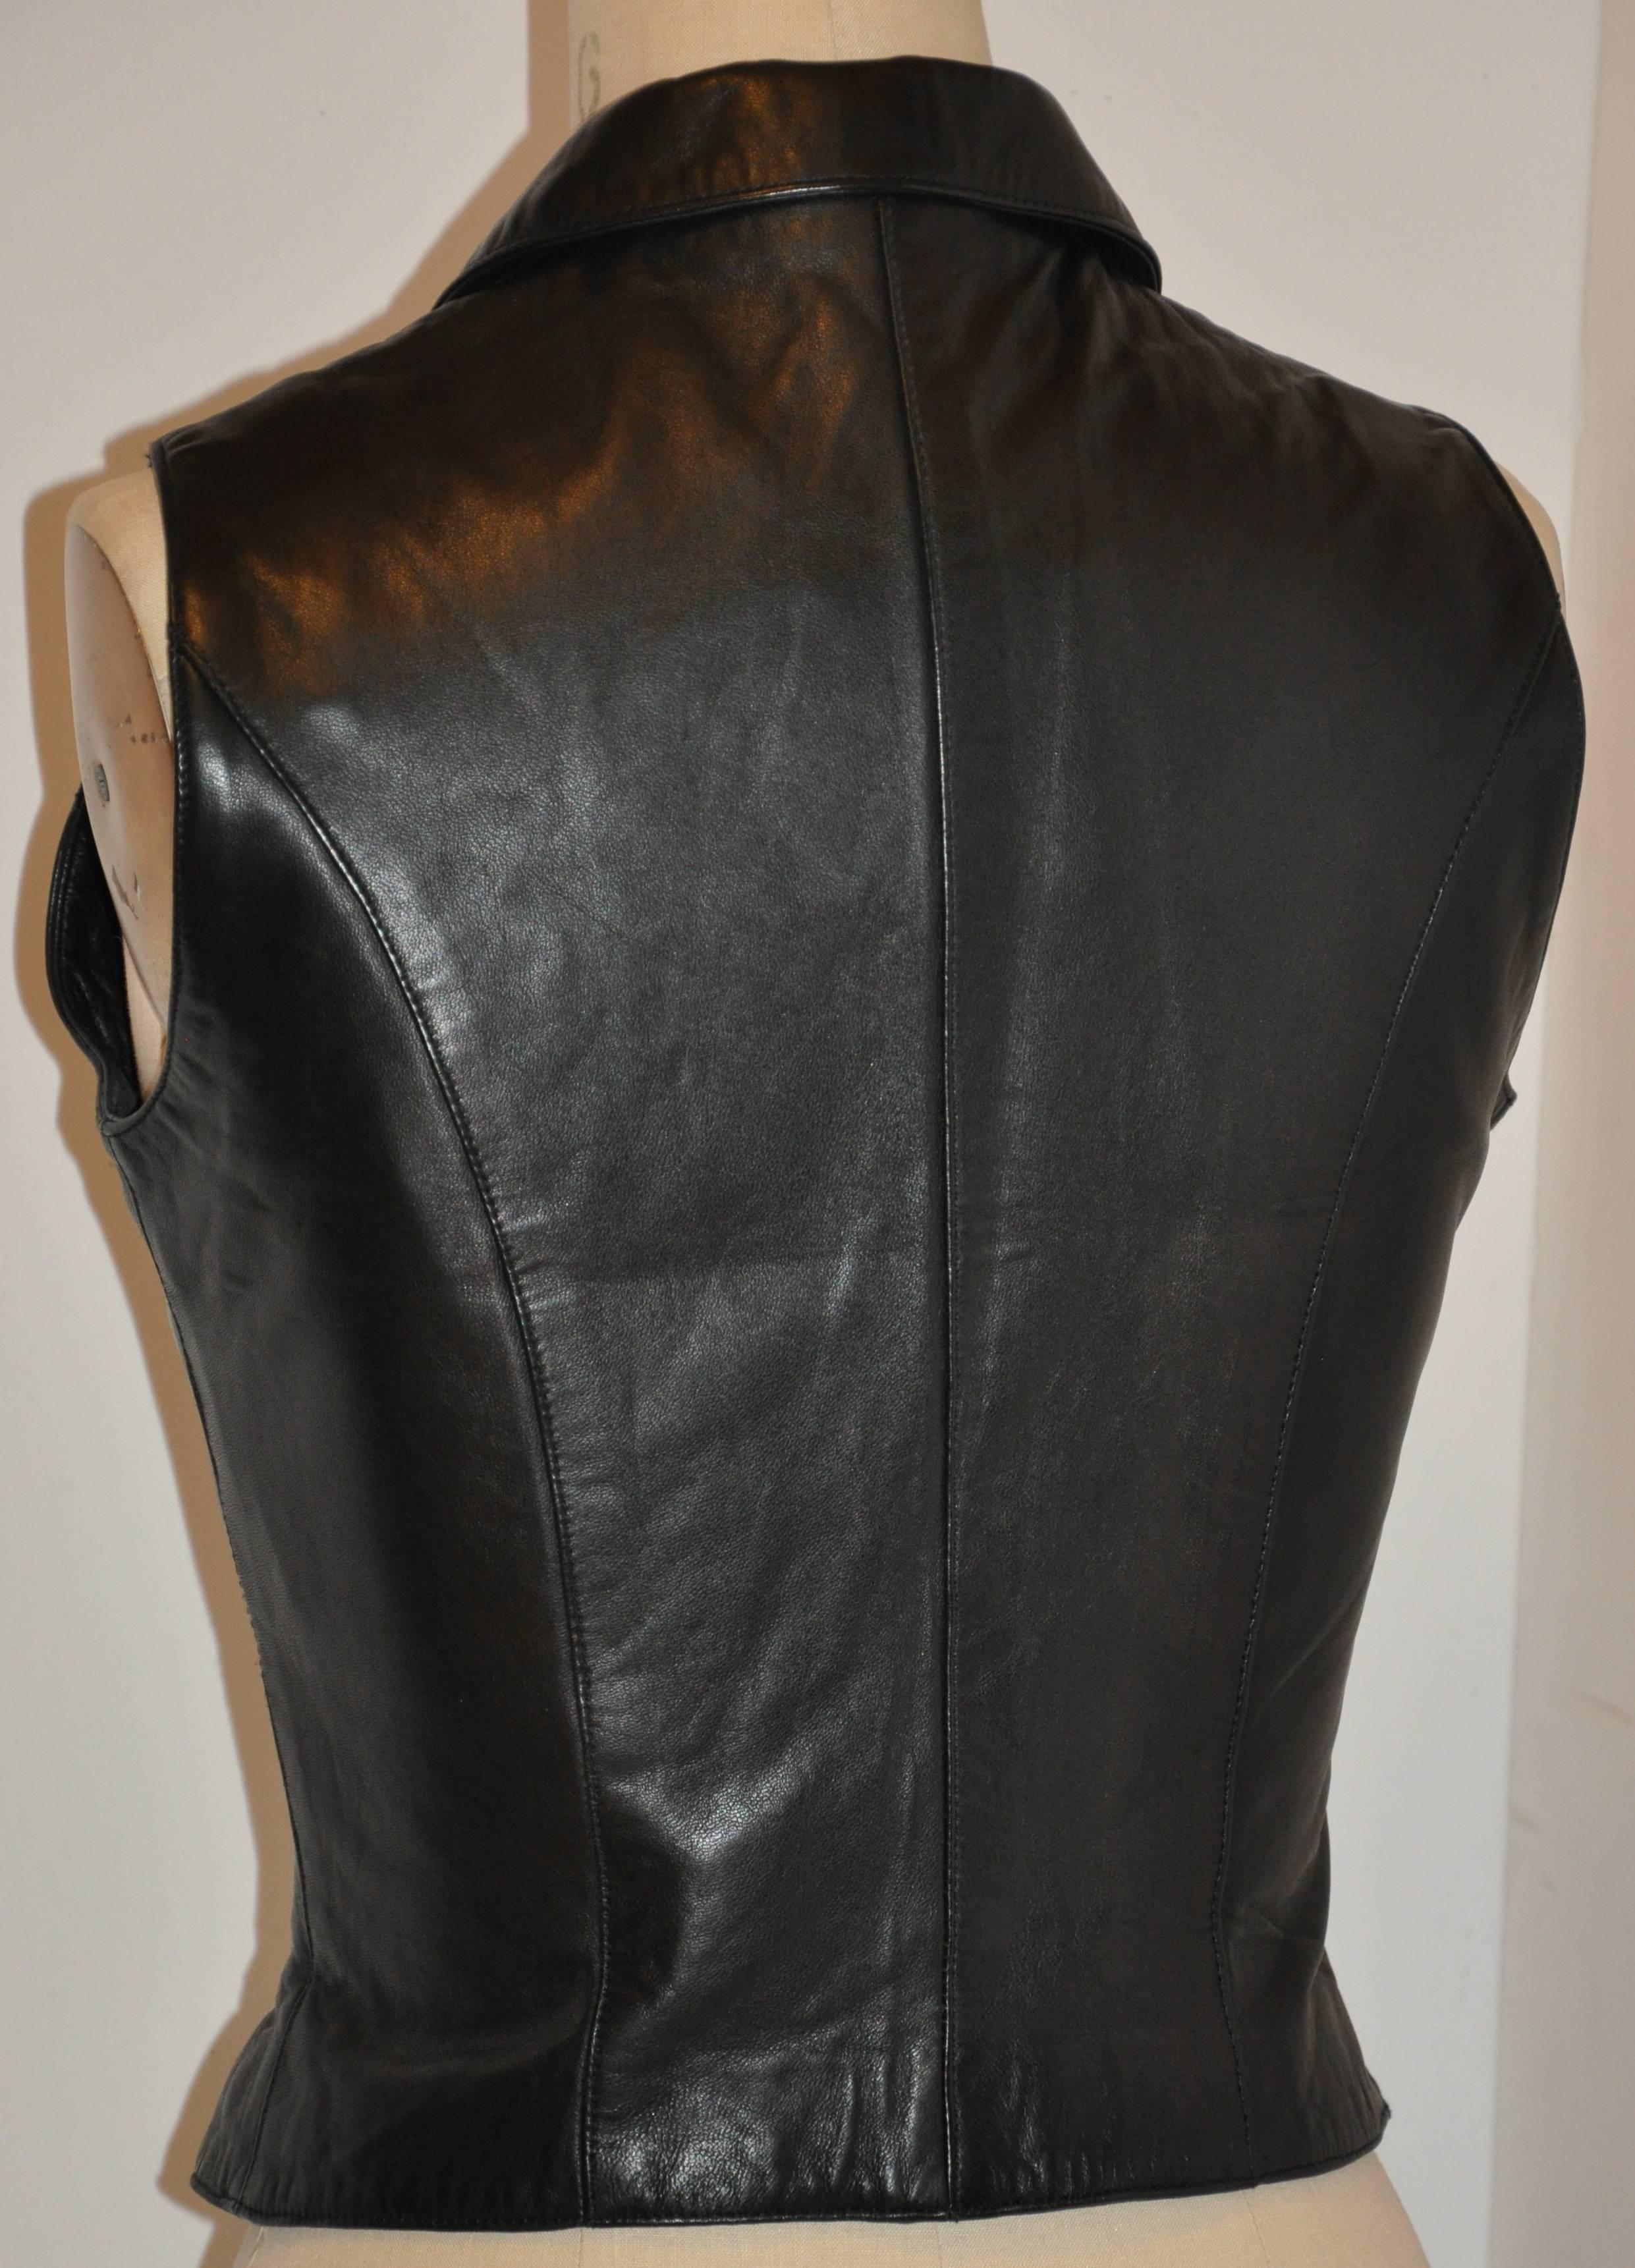         Michael Hoban for North Beach Leather black lambskin zippered front vest top measures 17 3/4